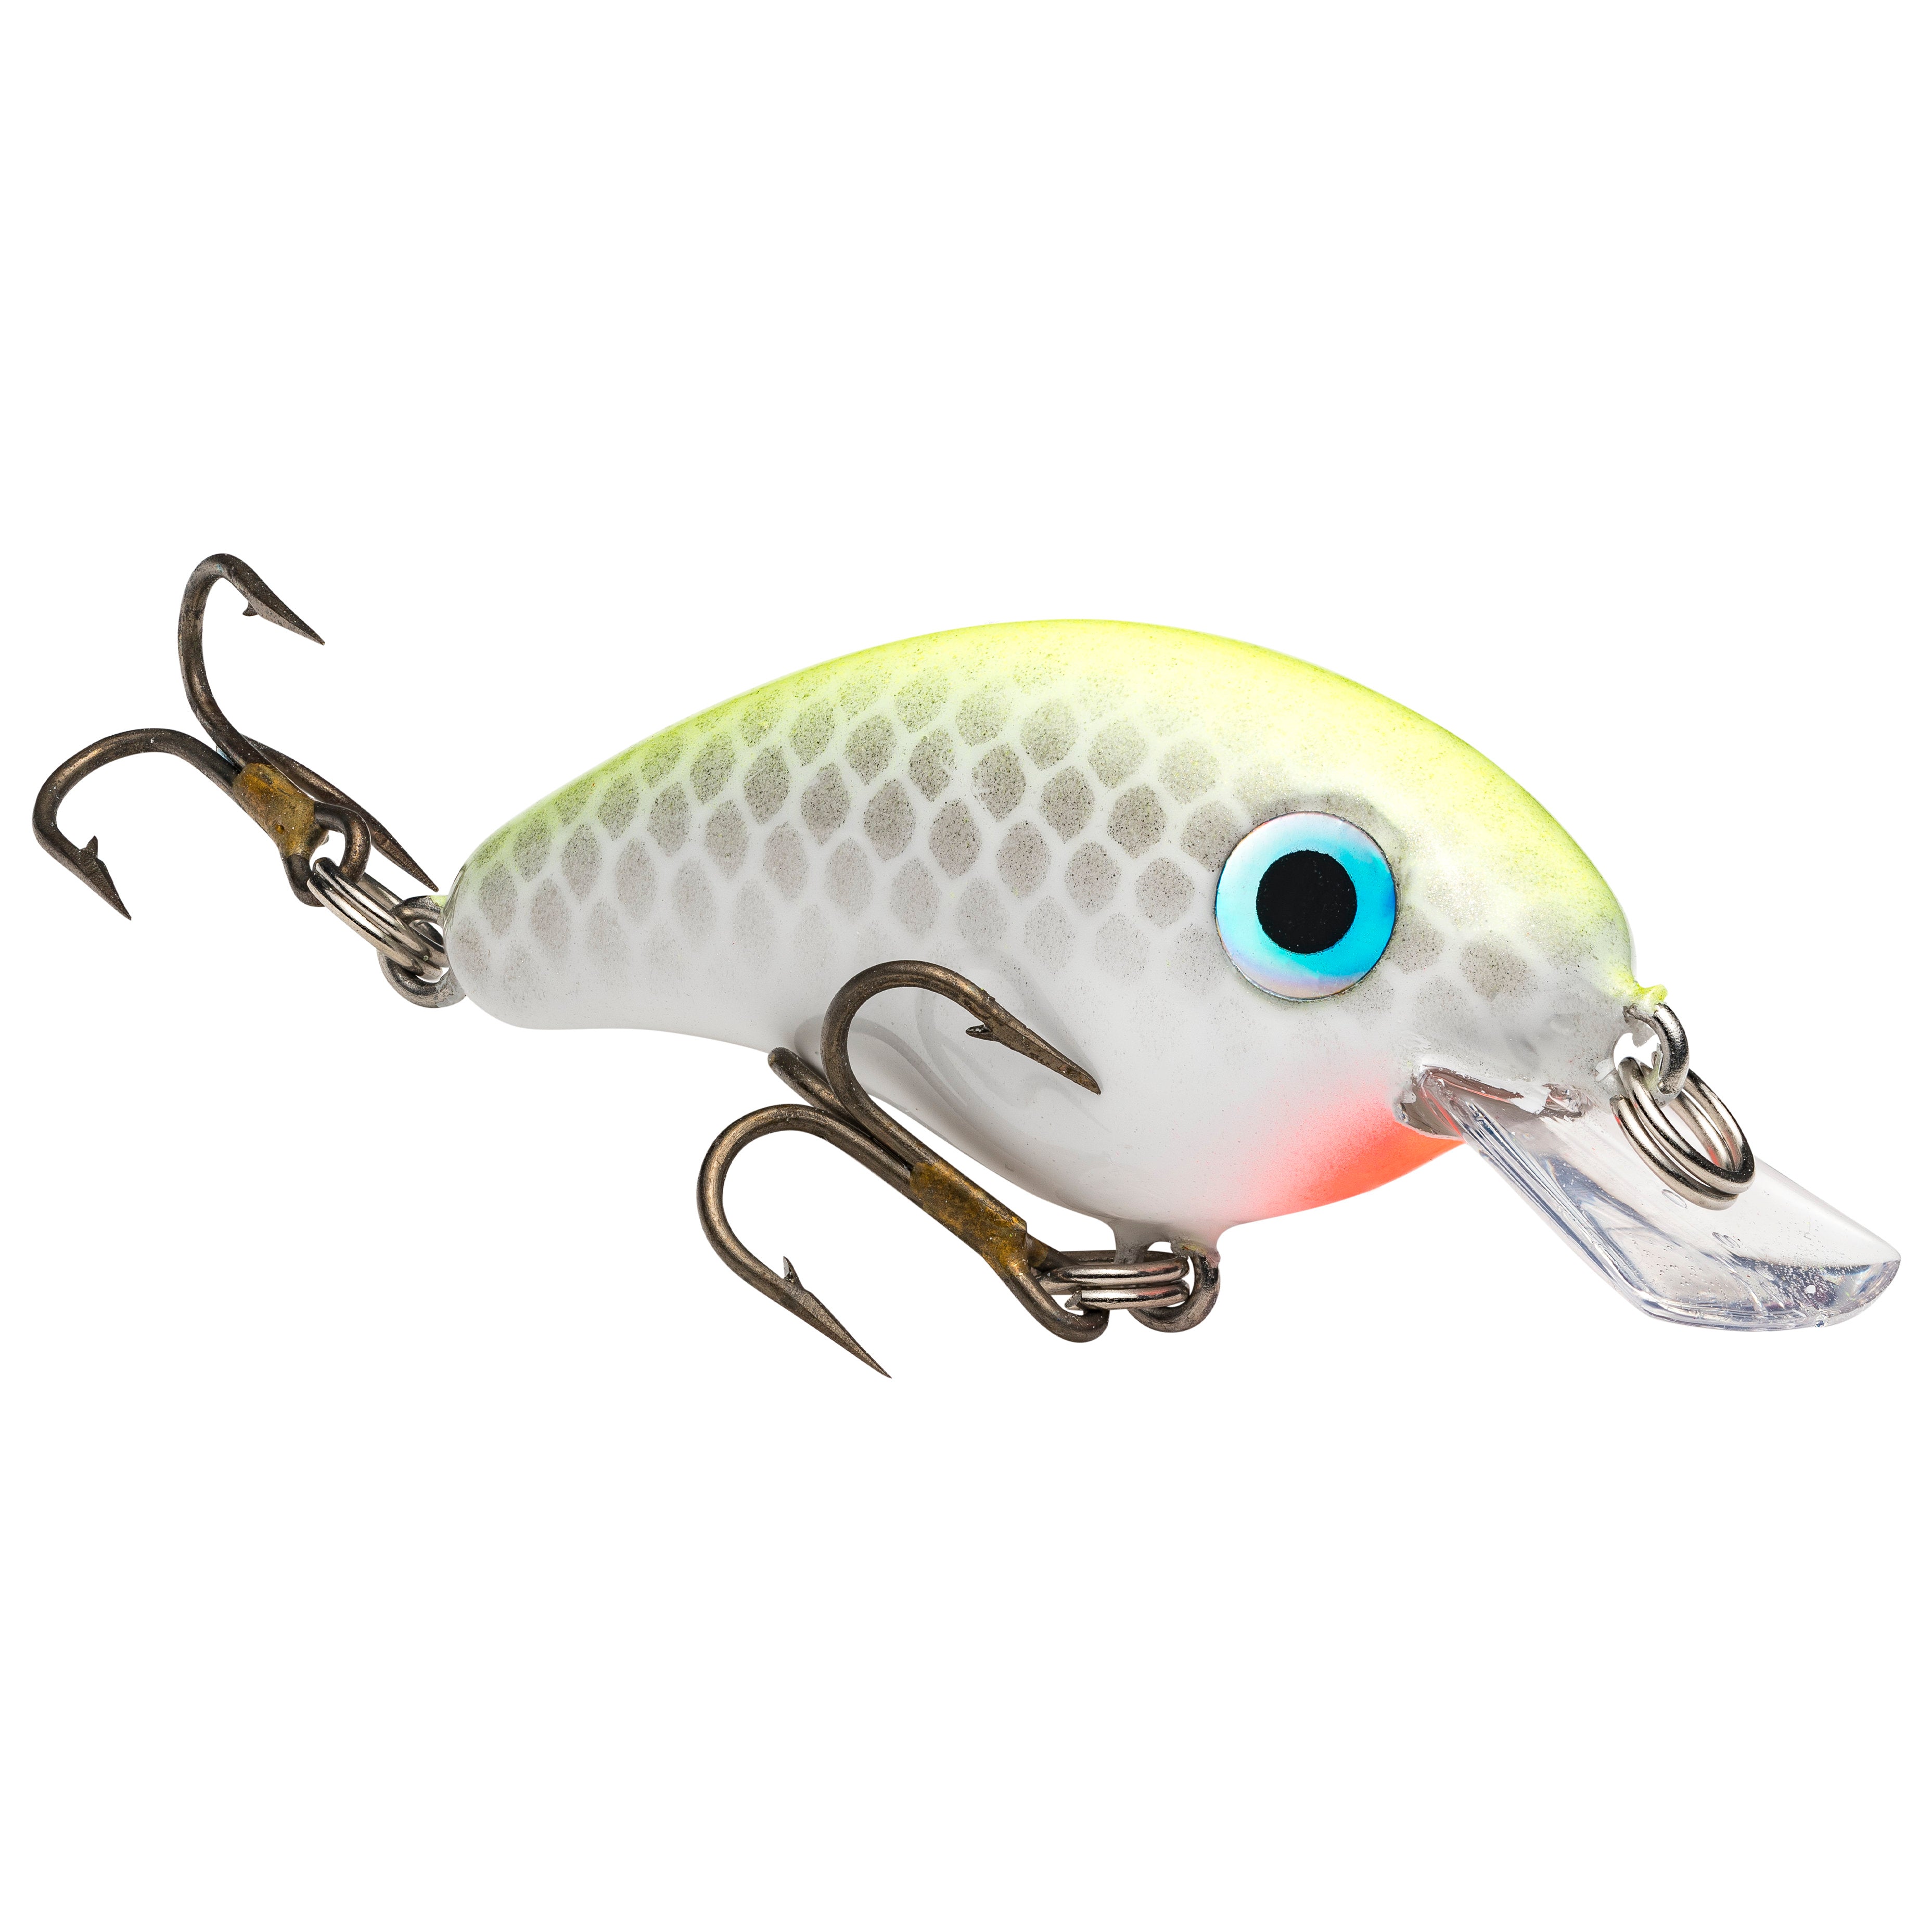 CXDa Willow Blade Spinner Bait Buzzbait Fishing Lures Bass Tackle Hook  Crankbait 